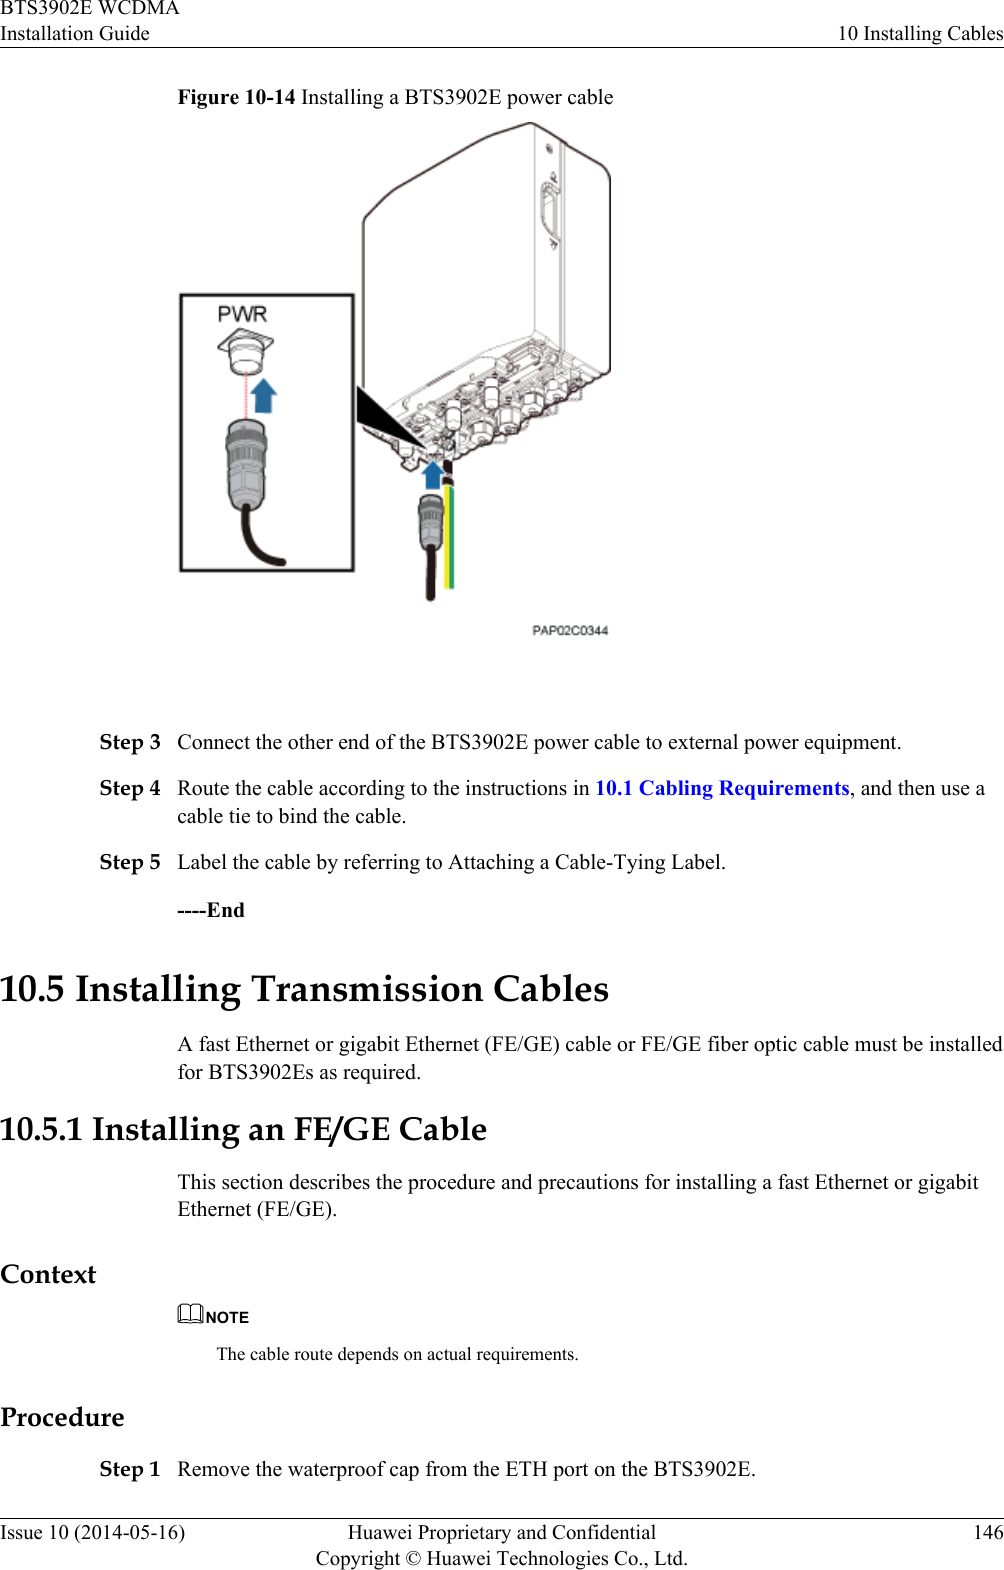 Figure 10-14 Installing a BTS3902E power cable Step 3 Connect the other end of the BTS3902E power cable to external power equipment.Step 4 Route the cable according to the instructions in 10.1 Cabling Requirements, and then use acable tie to bind the cable.Step 5 Label the cable by referring to Attaching a Cable-Tying Label.----End10.5 Installing Transmission CablesA fast Ethernet or gigabit Ethernet (FE/GE) cable or FE/GE fiber optic cable must be installedfor BTS3902Es as required.10.5.1 Installing an FE/GE CableThis section describes the procedure and precautions for installing a fast Ethernet or gigabitEthernet (FE/GE).ContextNOTEThe cable route depends on actual requirements.ProcedureStep 1 Remove the waterproof cap from the ETH port on the BTS3902E.BTS3902E WCDMAInstallation Guide 10 Installing CablesIssue 10 (2014-05-16) Huawei Proprietary and ConfidentialCopyright © Huawei Technologies Co., Ltd.146